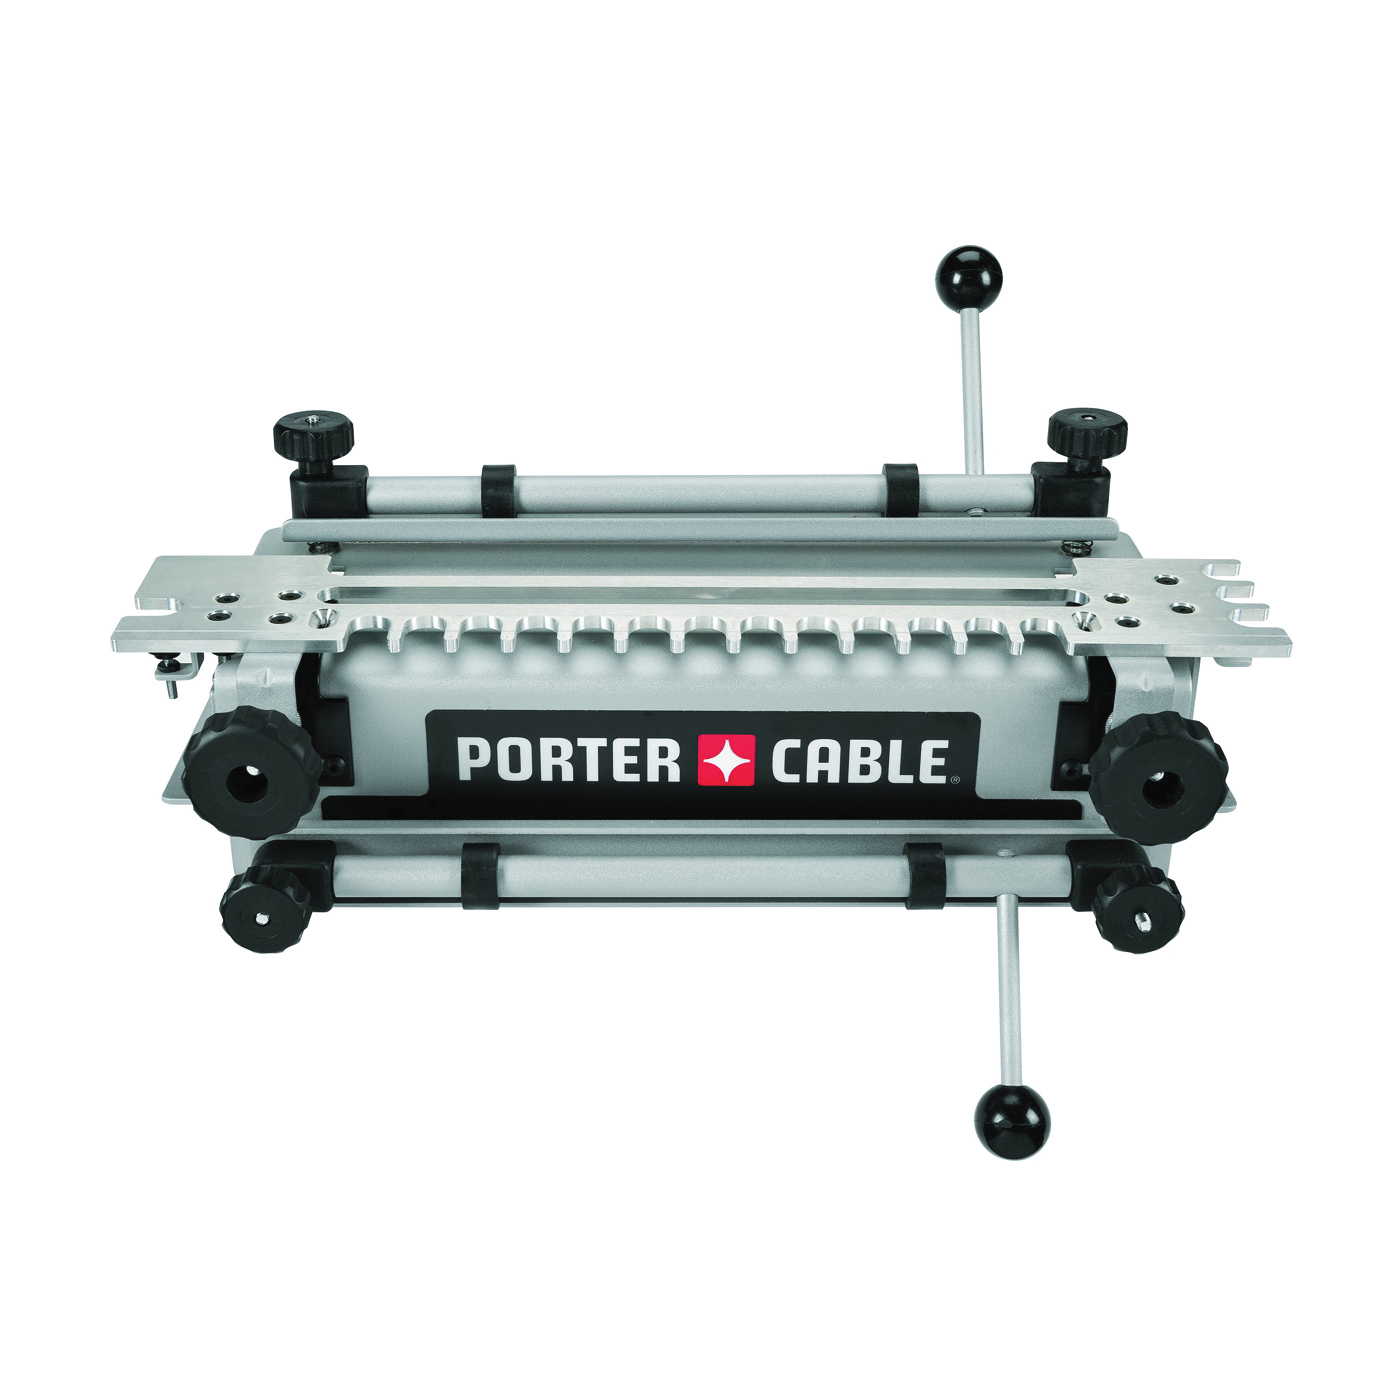 Porter-cable 4210